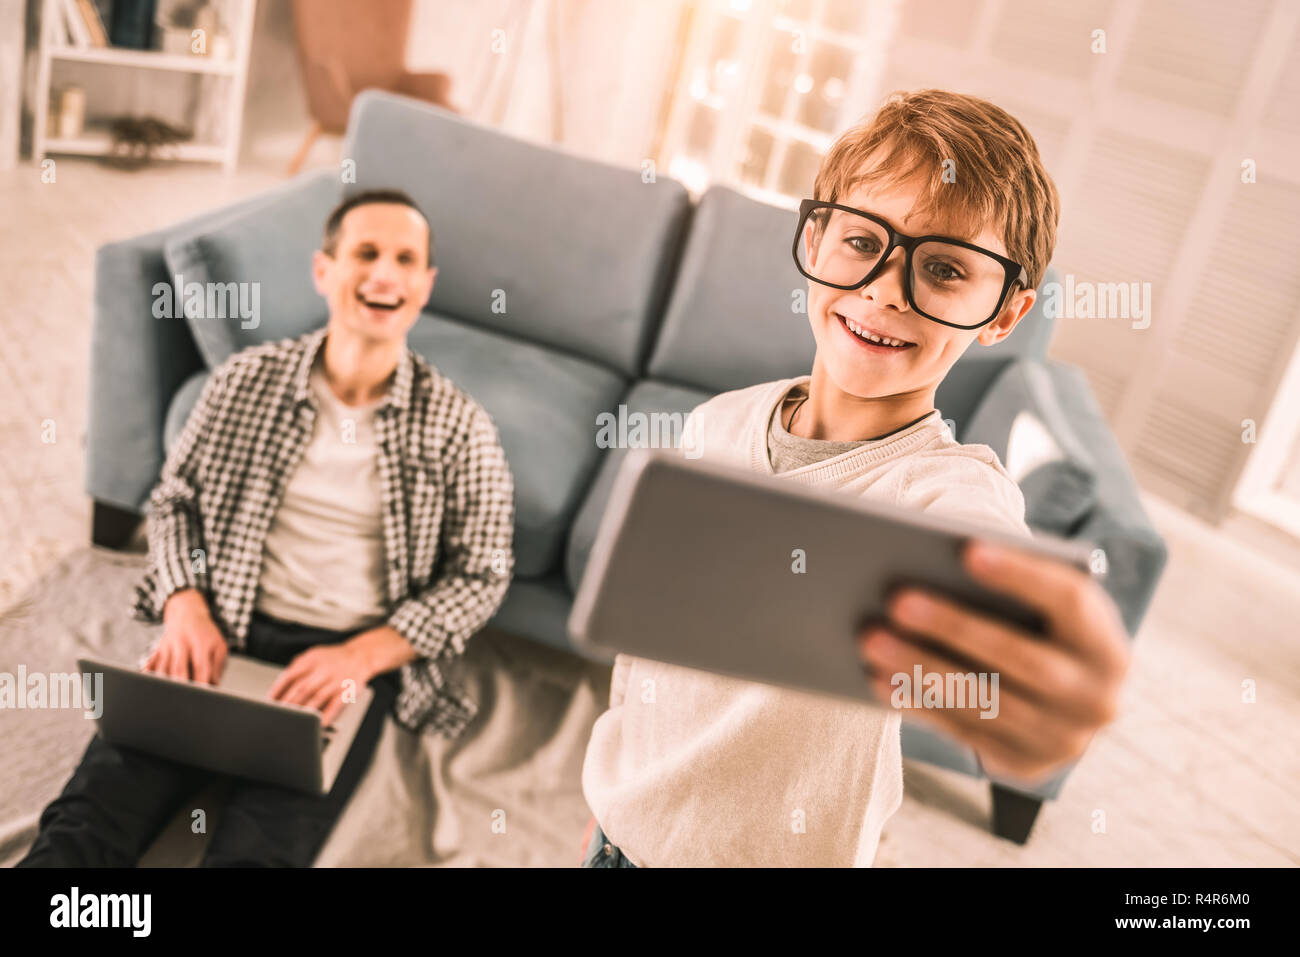 Happy father amused by his son's goofy behaviour. Stock Photo